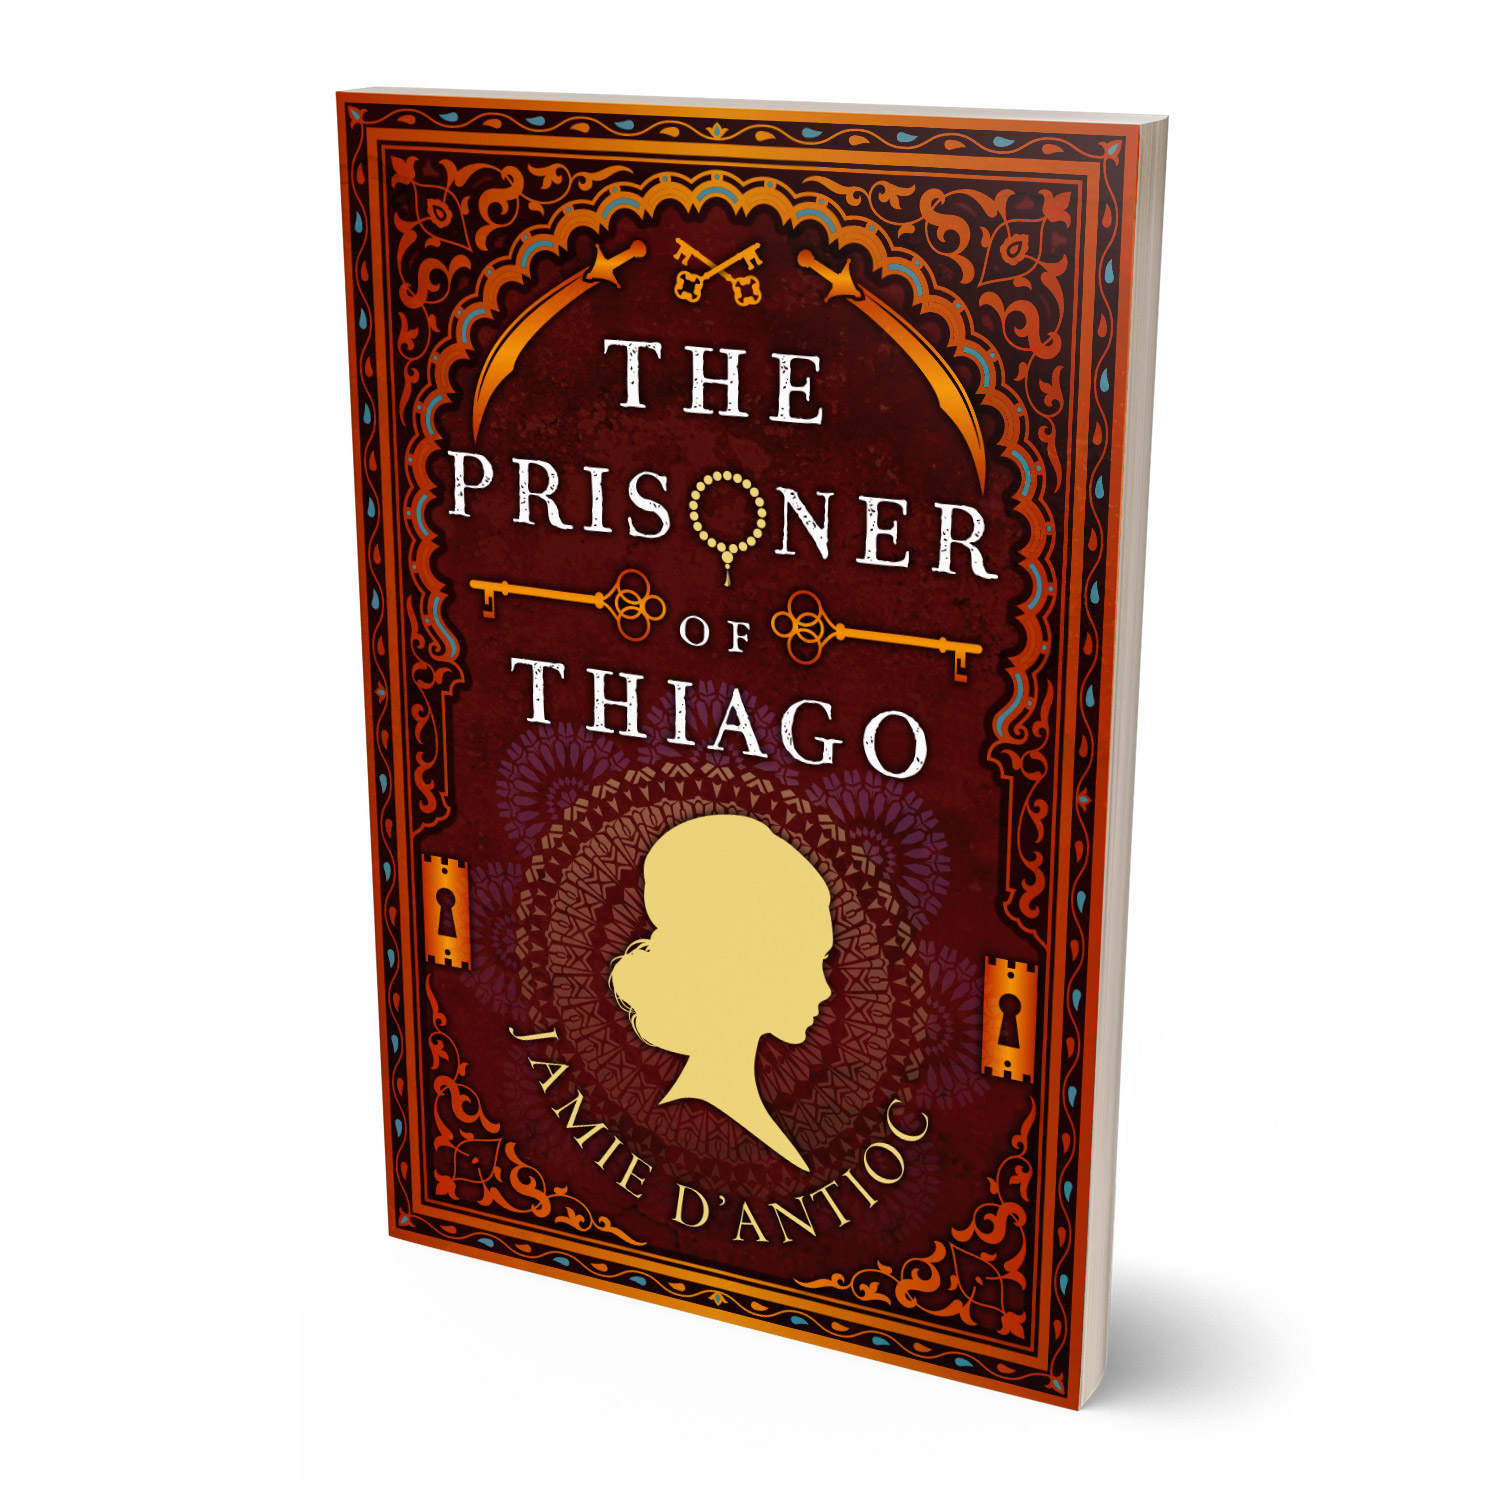 'The Prisoner of Thiago' is a thrilling historical novel, by Jamie D'Antioc. The book cover and interior were designed by Mark Thomas, of coverness.com. To find out more about my book design services, please visit www.coverness.com.